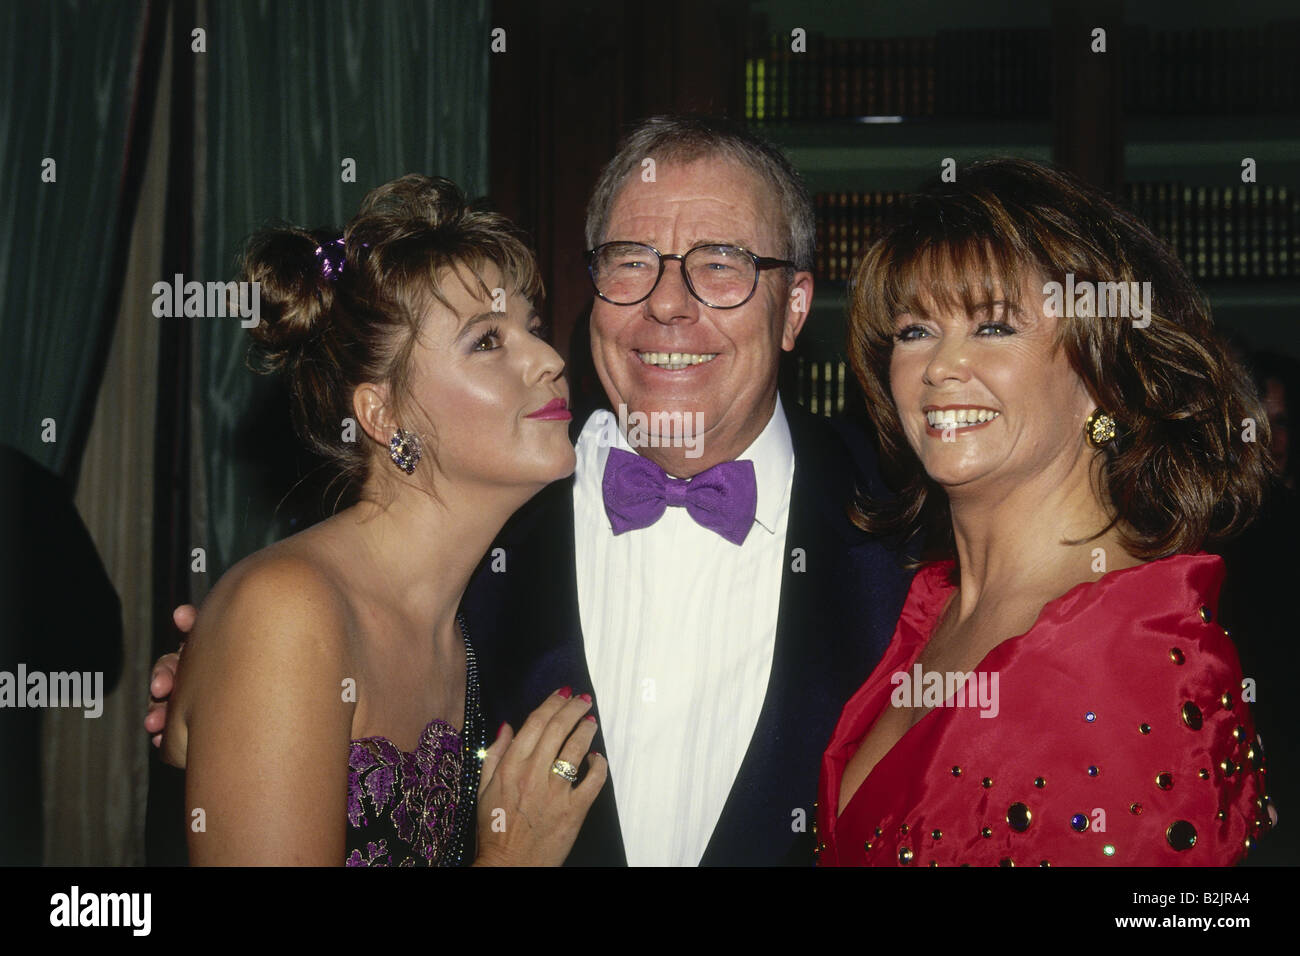 Bruhn, Christian, * 17.10.1934, German composer, half length, with his wife Erica Goetz and Wencke Myhre, at his 60th birthday party, Munich, 1994, Stock Photo